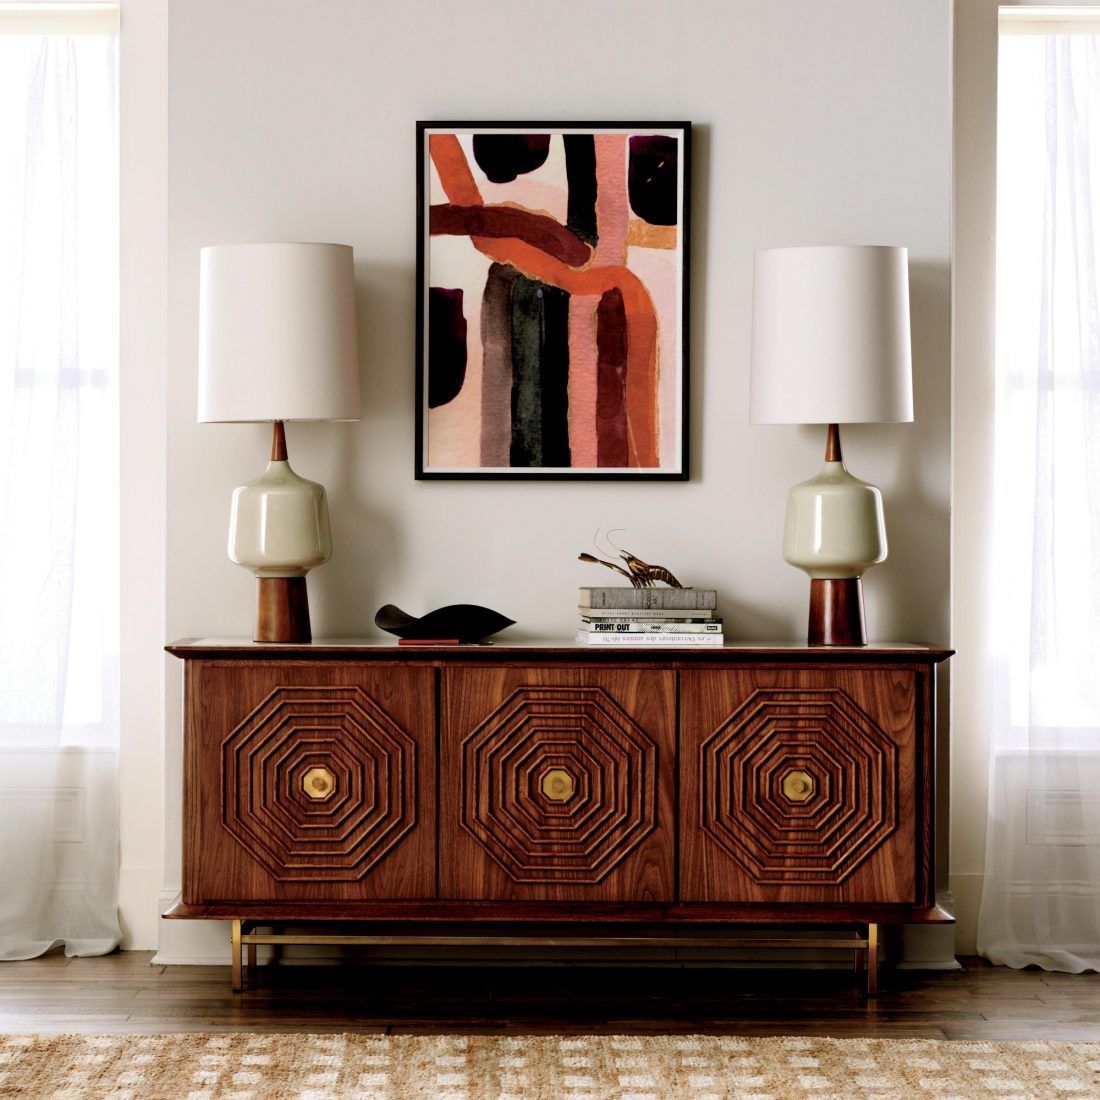 Cool And Practical Calhoun Sideboards